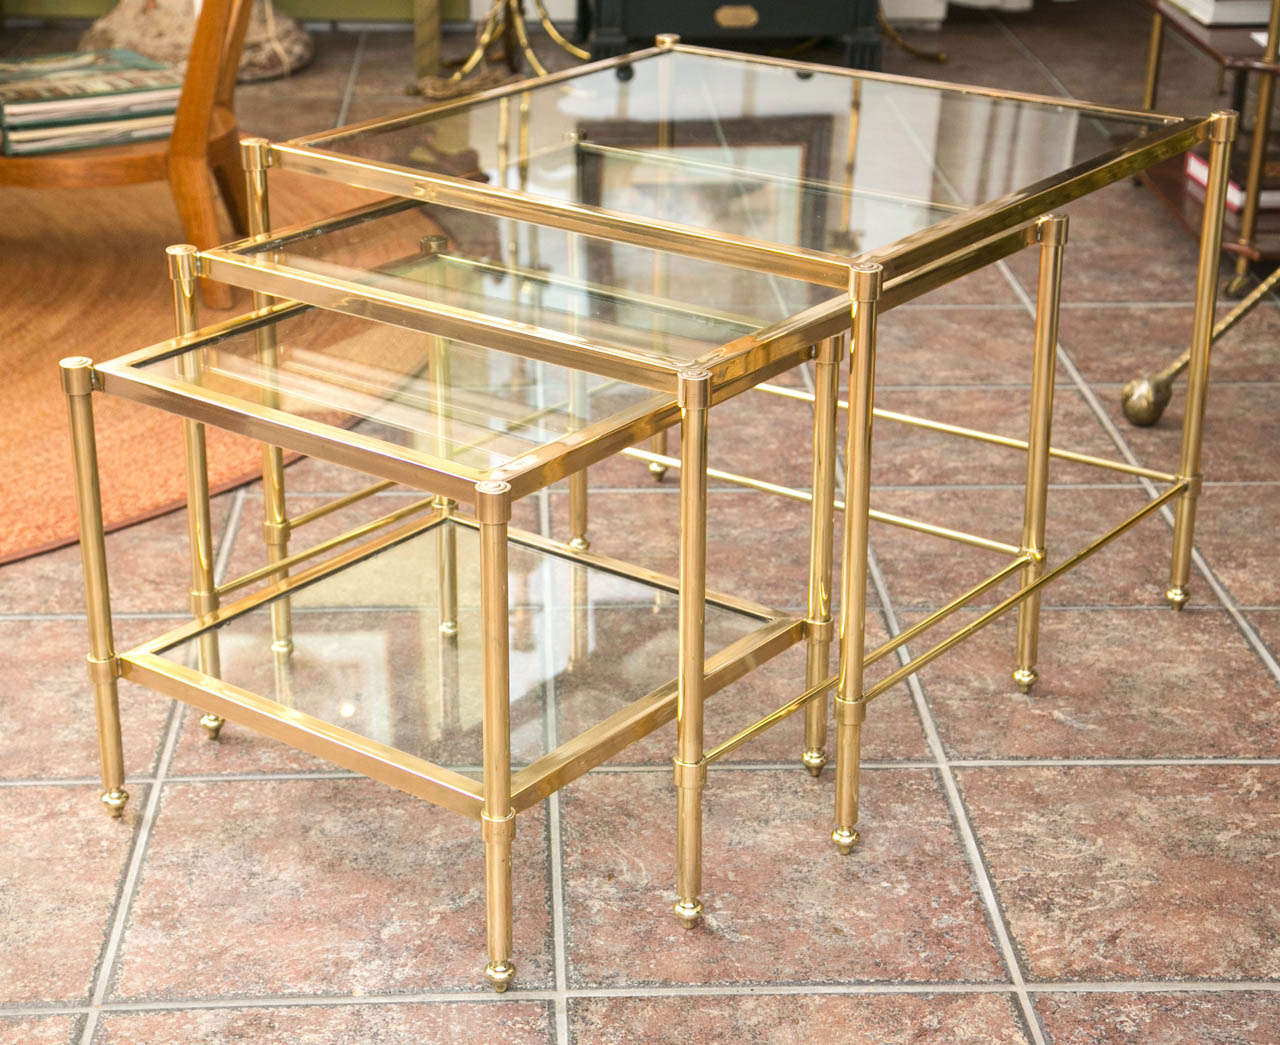 Three bronze nesting tables
Large table 25